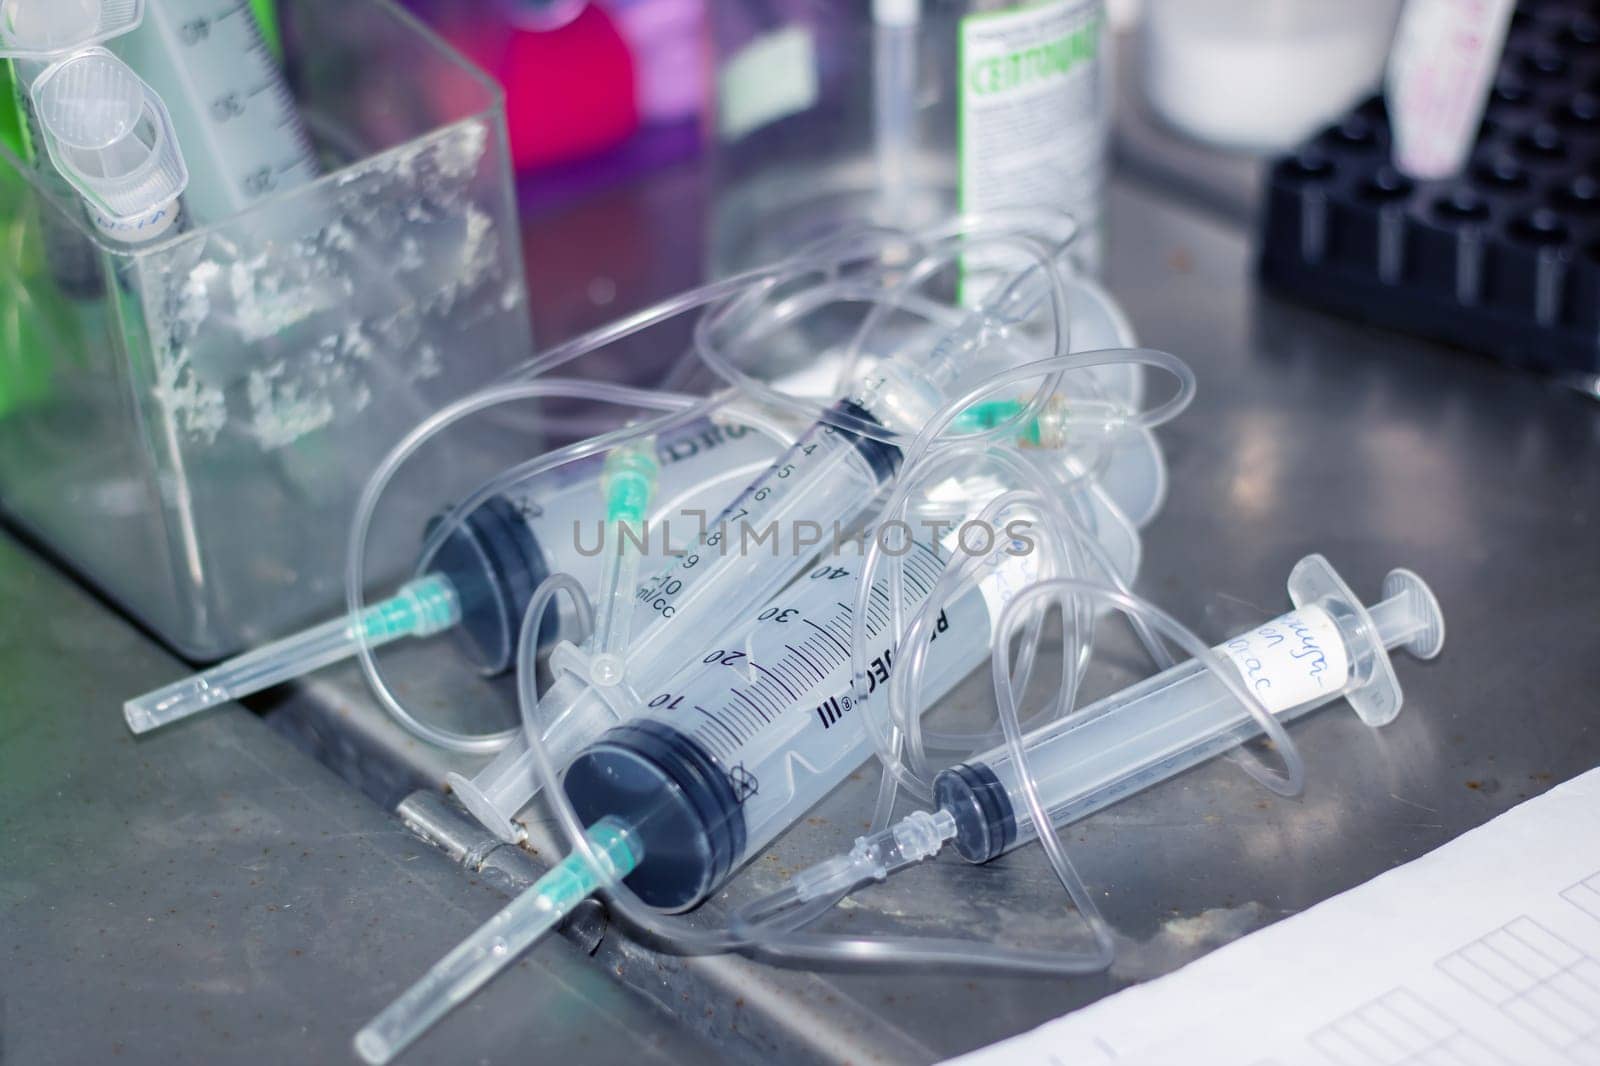 Liquidfilled syringes resting on table, ready for use by Vera1703